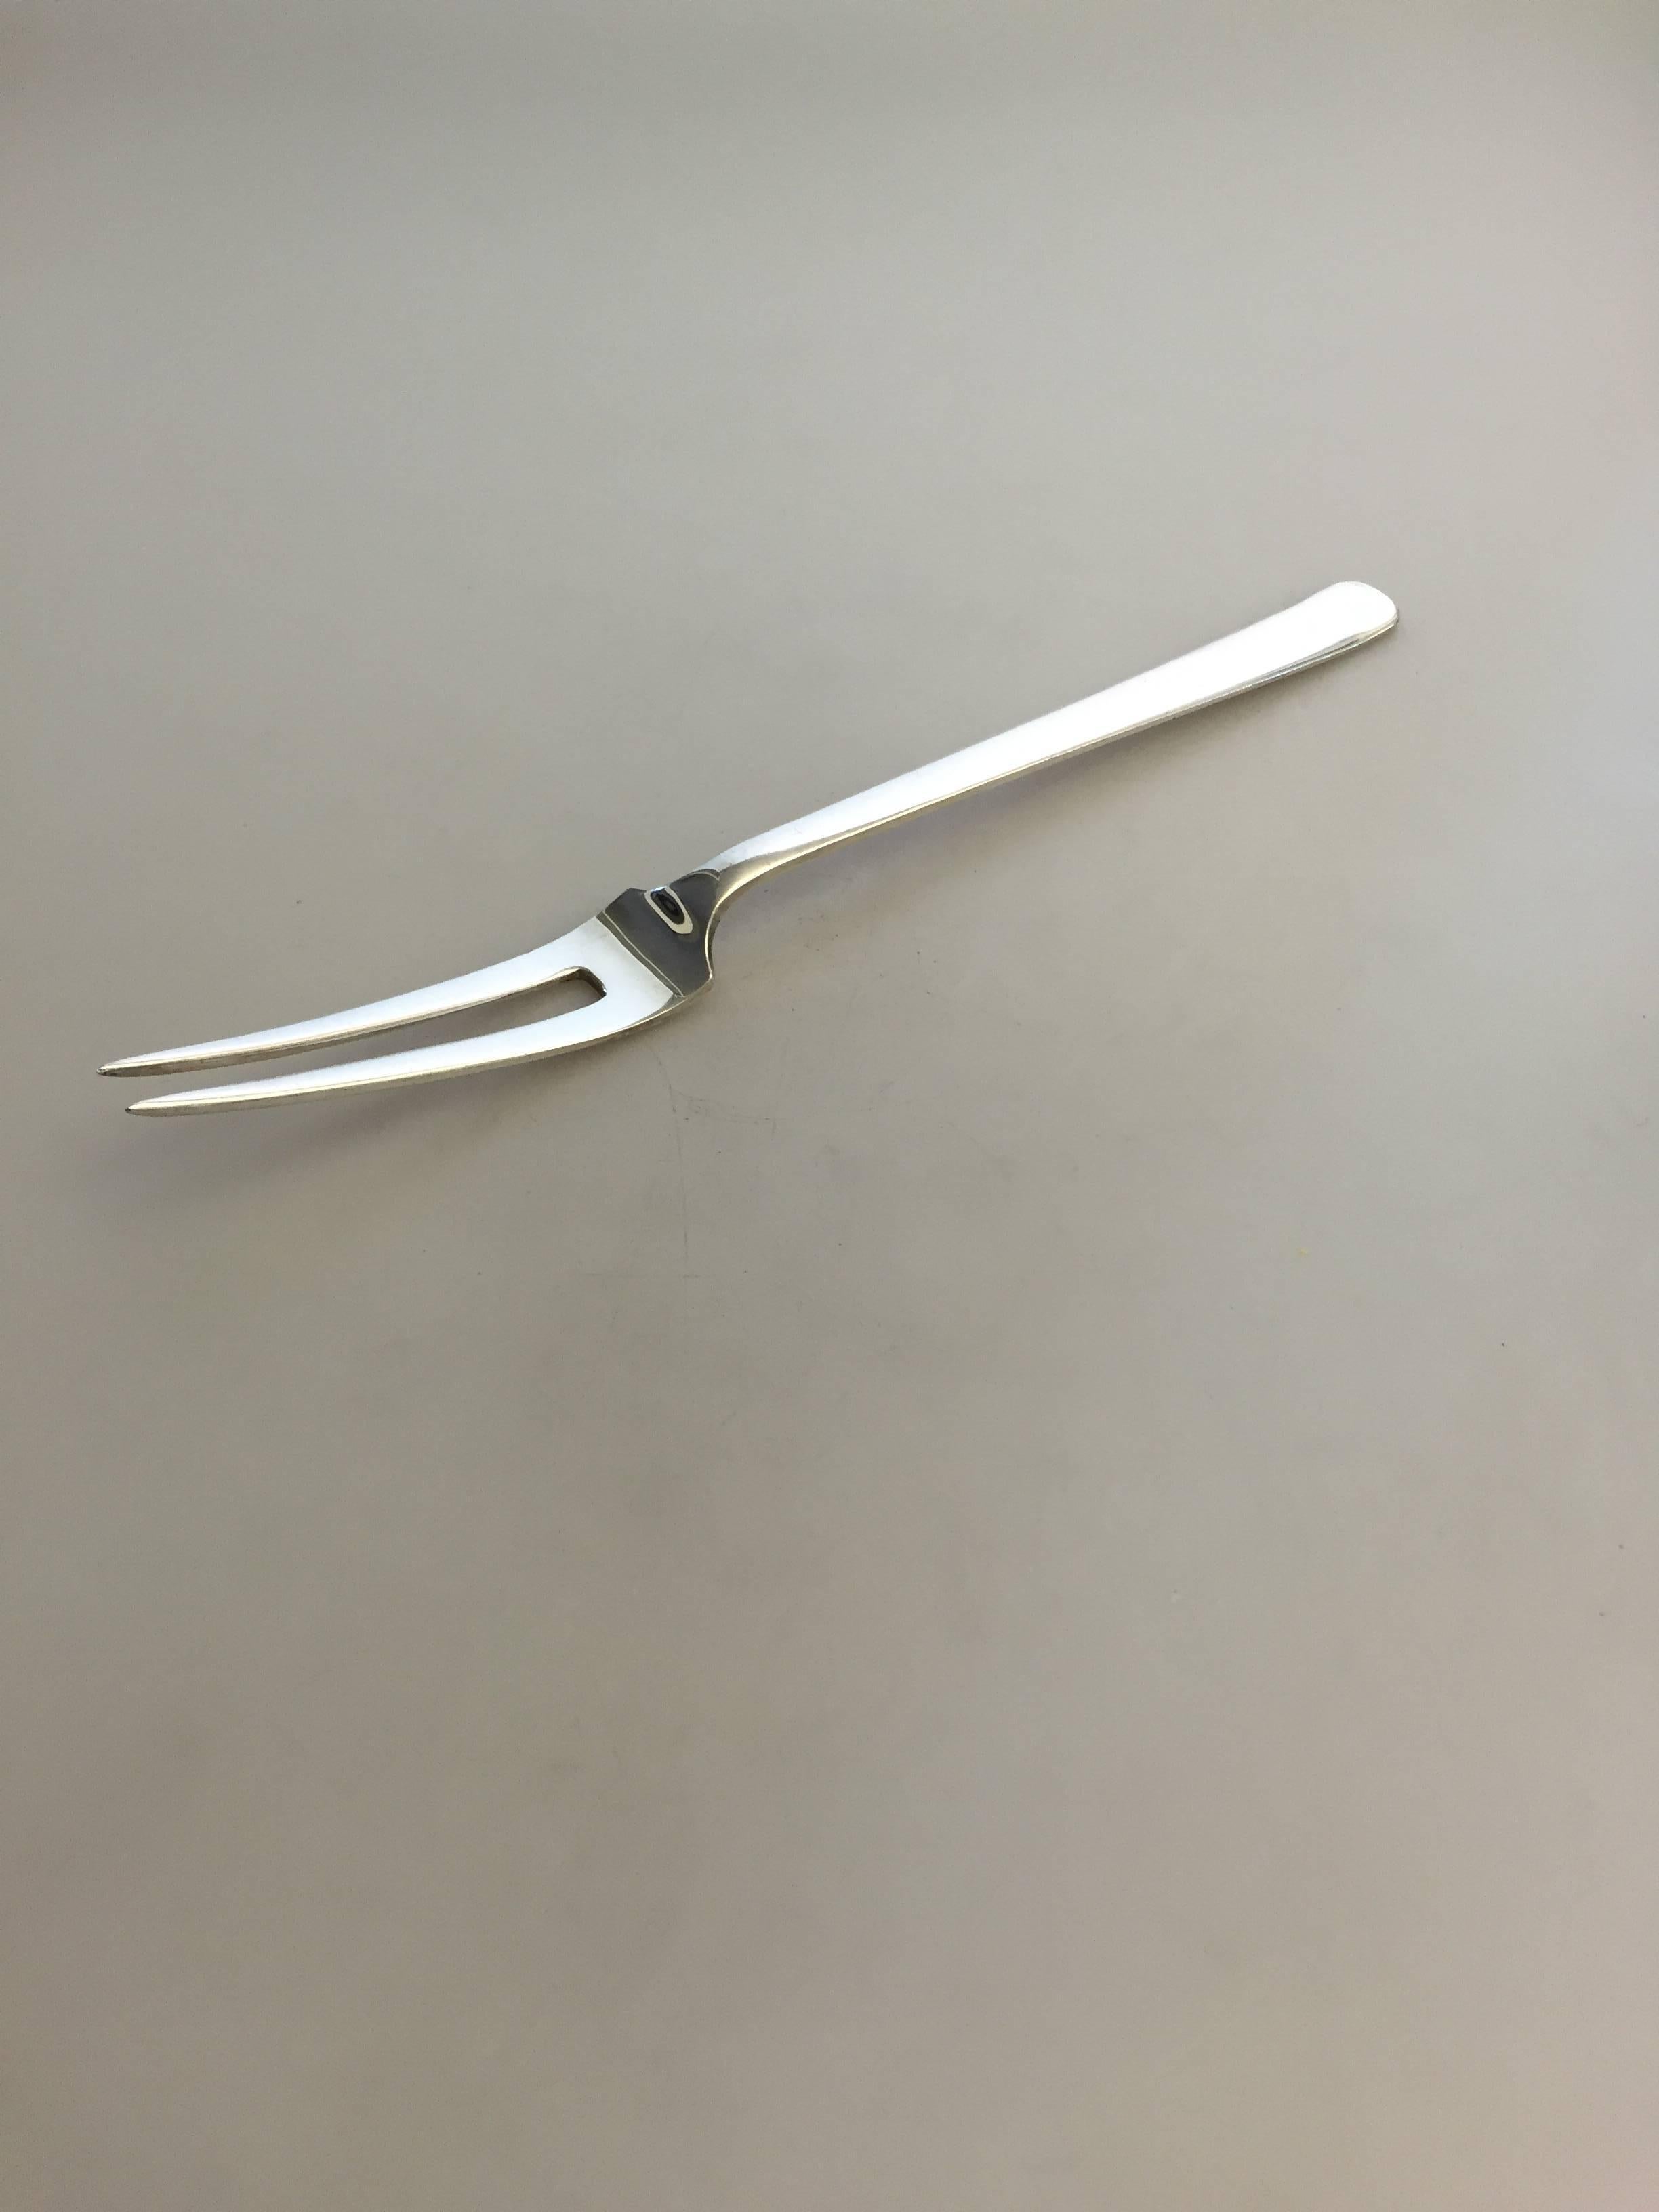 Kay Bojesen large meat serving fork in silver. From 1930.

Measures: 27.3.
Weighs 3.85 oz / 110 g.

Kay Bojesen (1886– 1958) was a Danish silversmith and designer. He is best known for creating wooden animels, especially his wooden monkey which